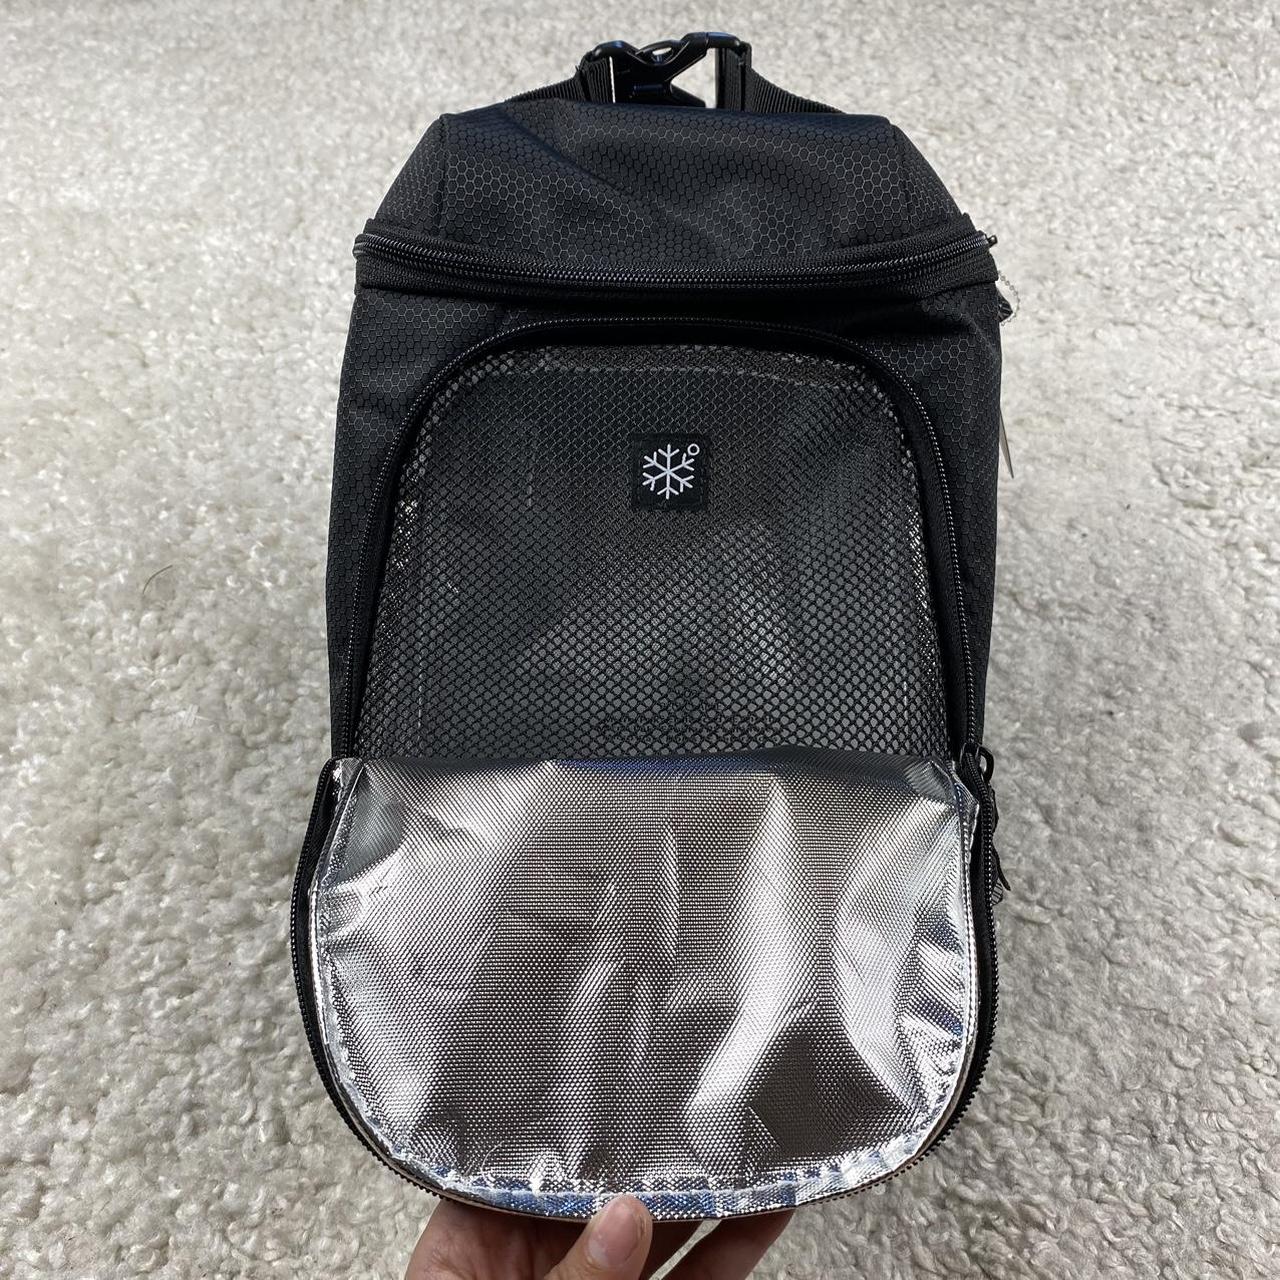 Under armour lunch box really good - Depop